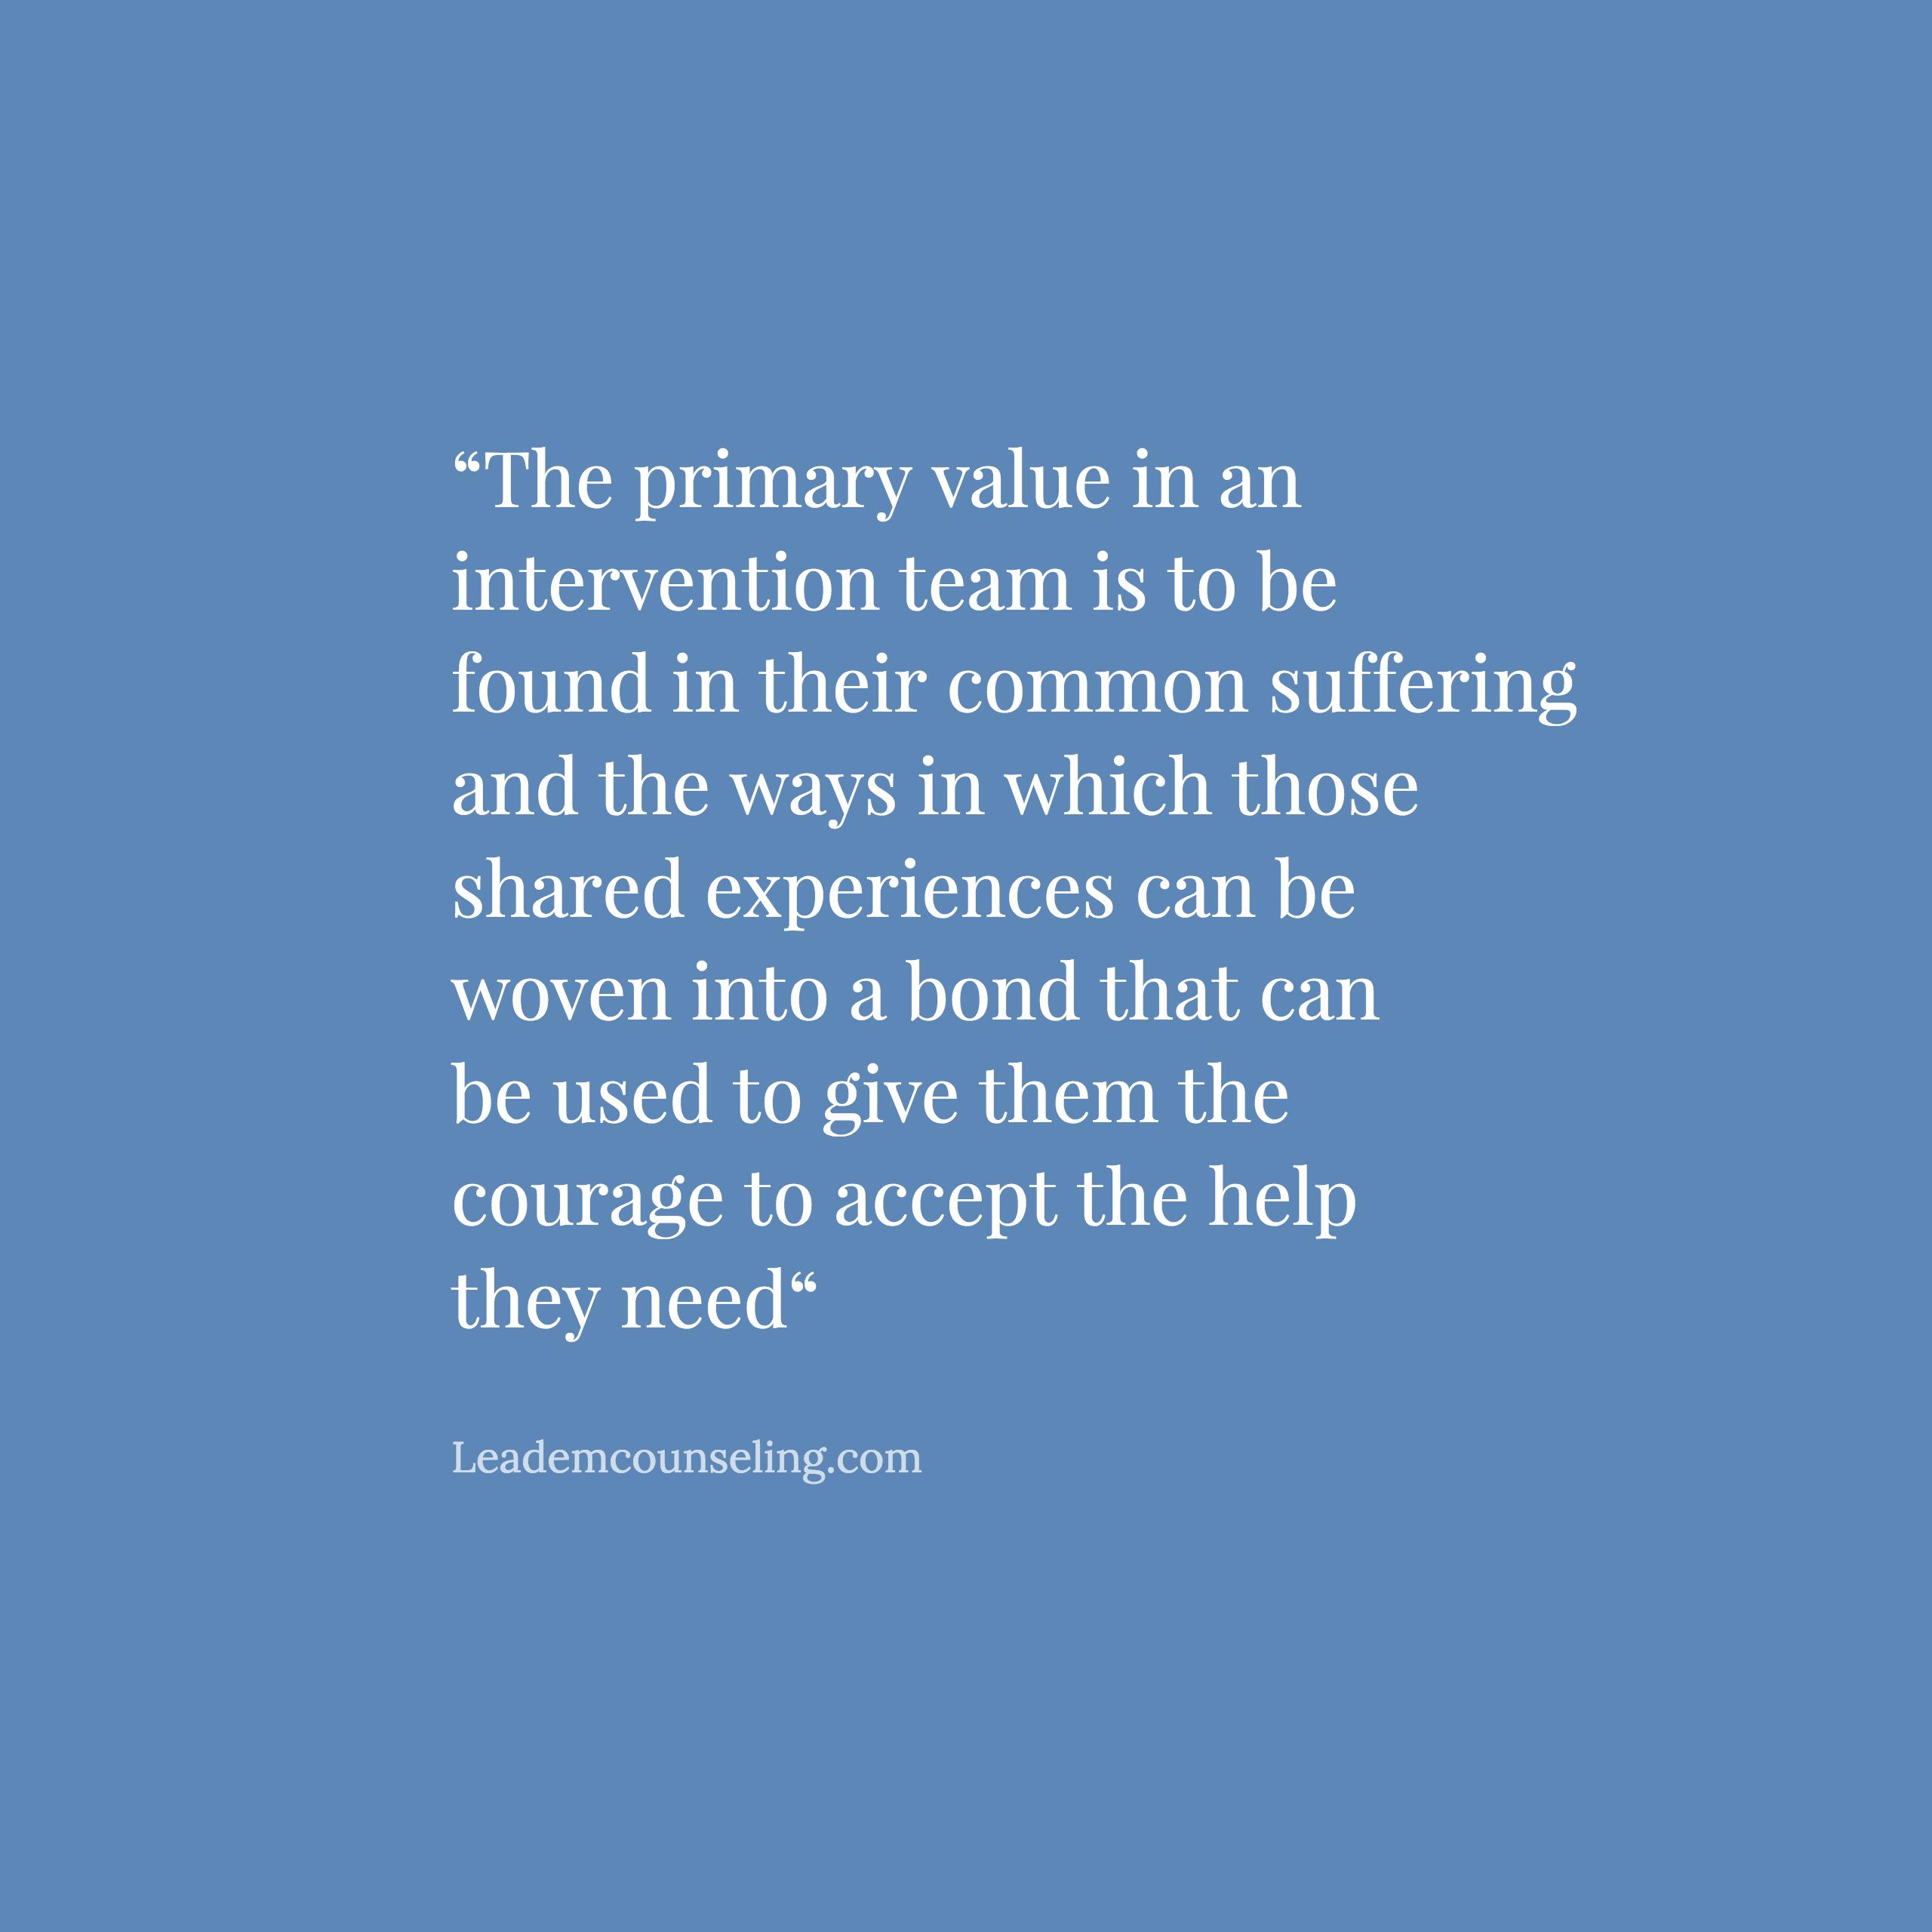 The primary value in an intervention team is to be found in their common suffering and the ways in which those shared experiences can be woven into a bond that can be used to give them the courage to accept the help they need